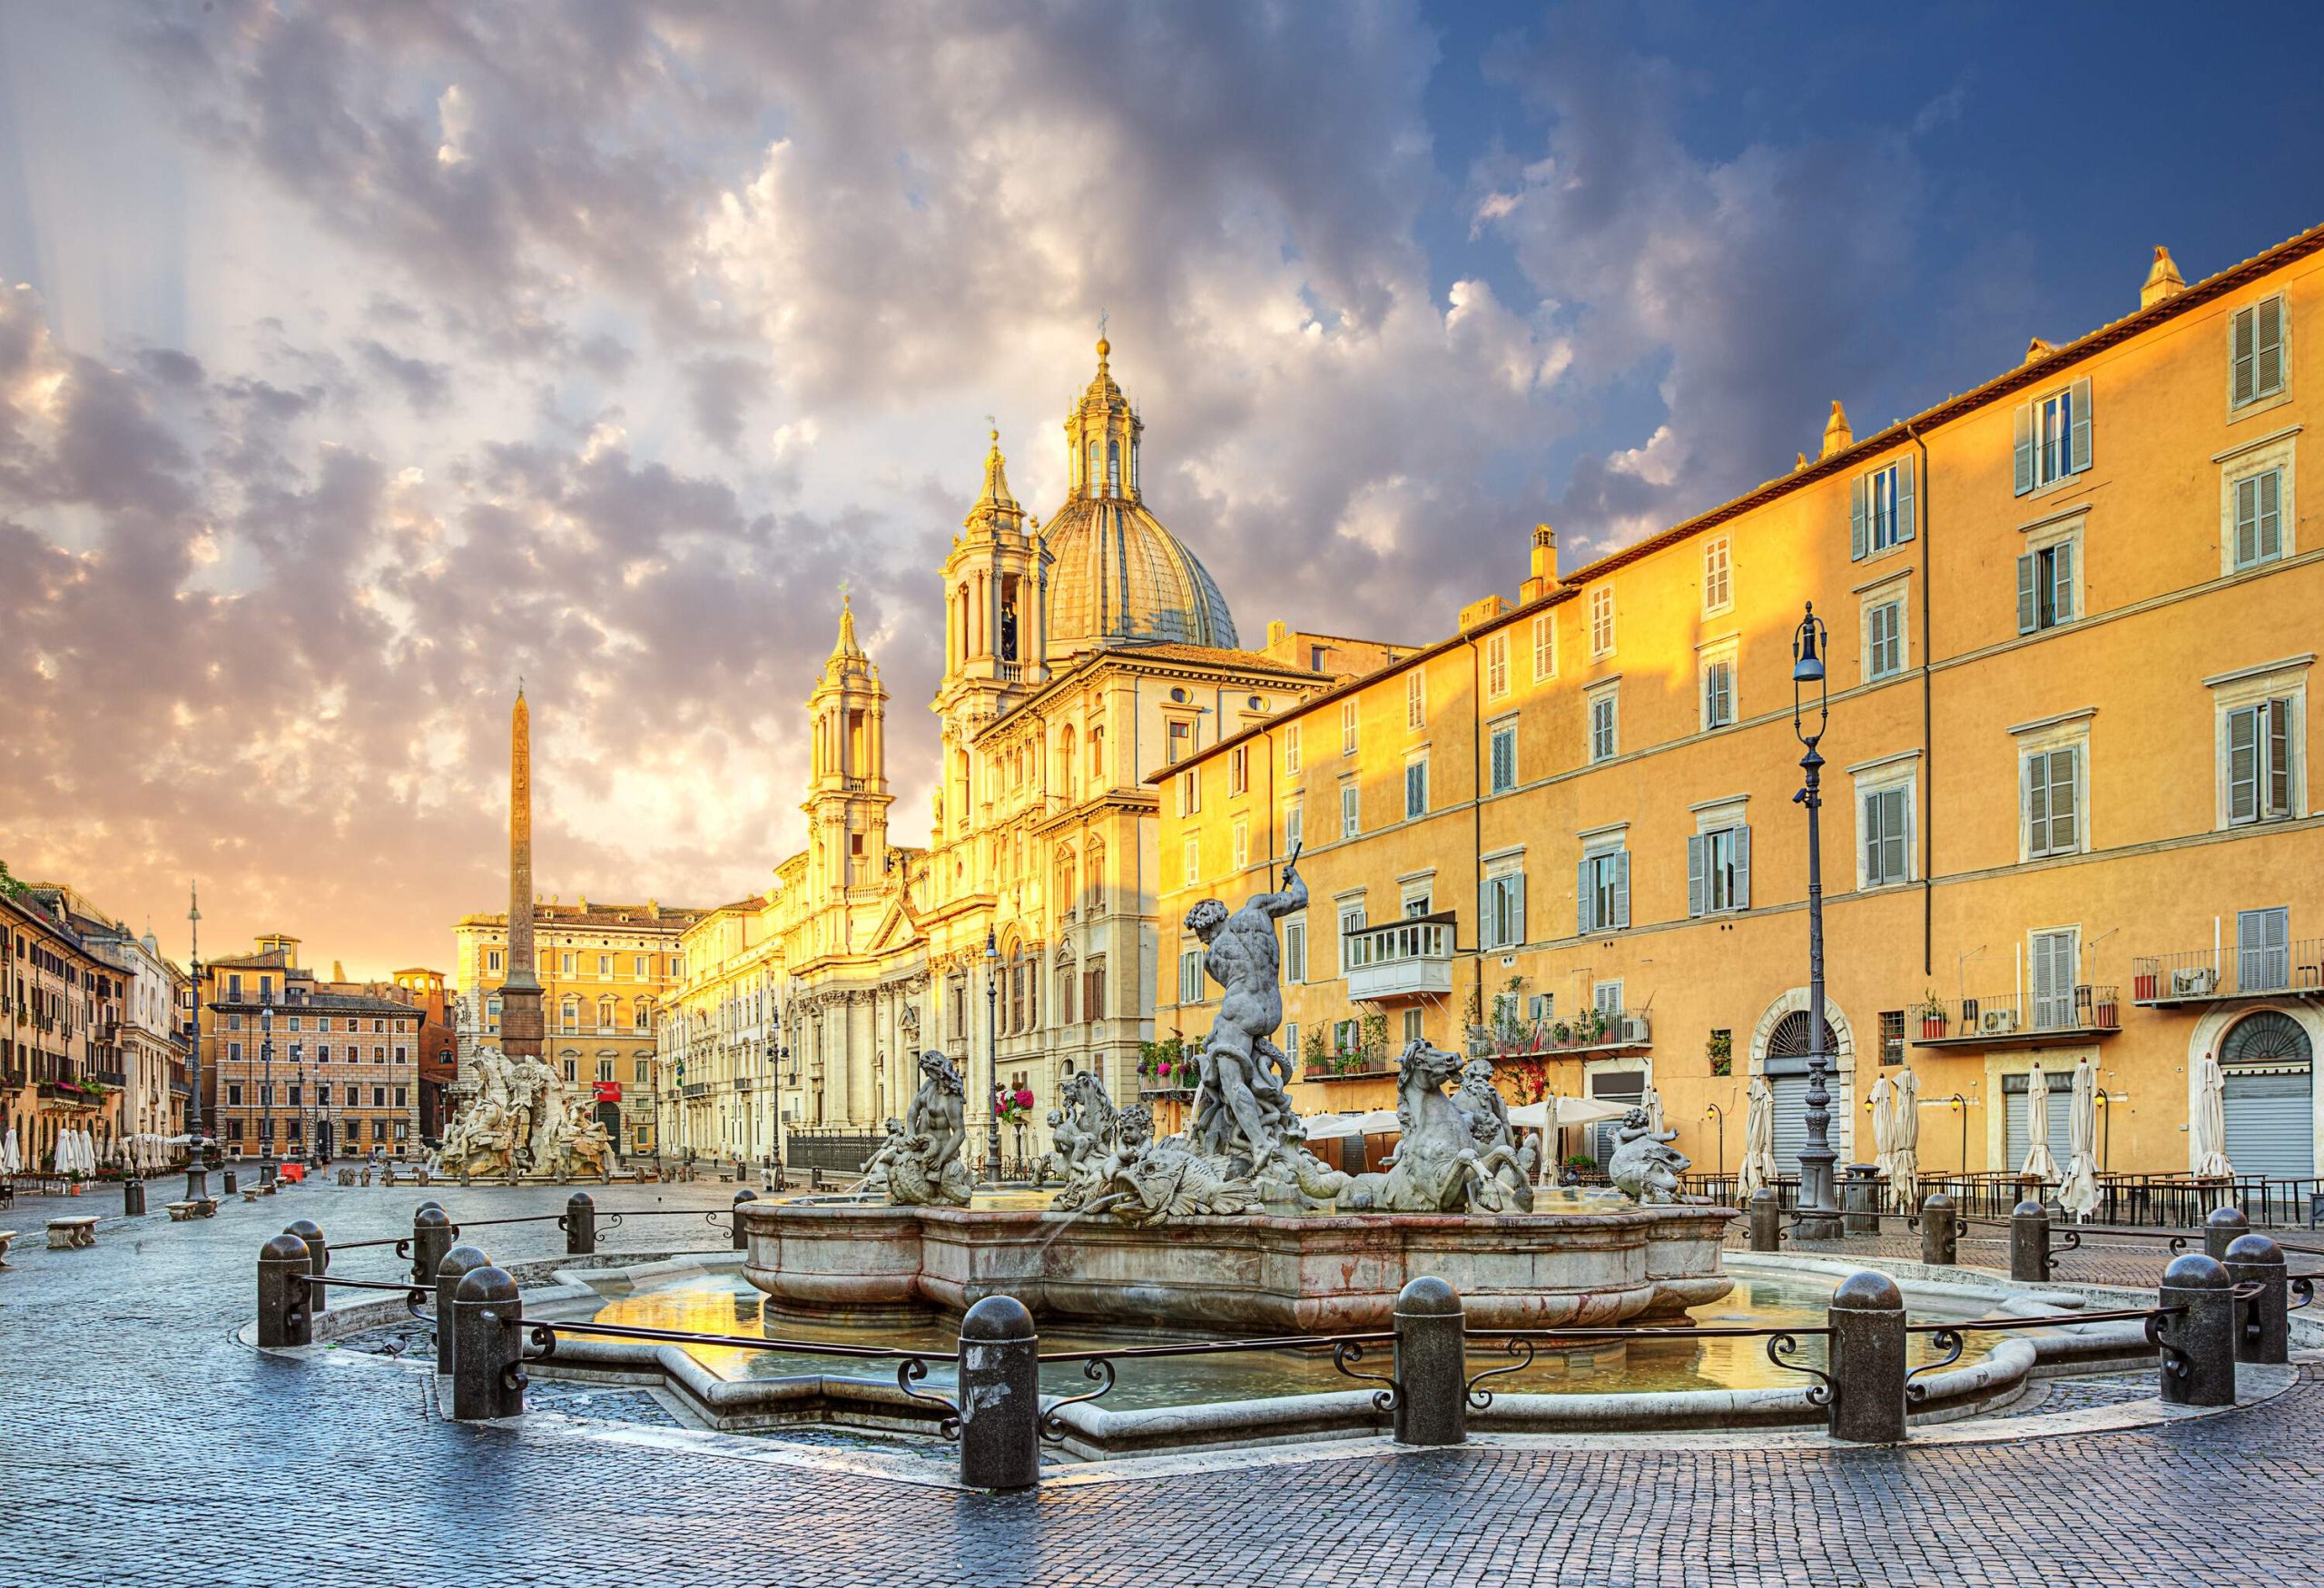 A bustling town square surrounded by buildings with two towers, featuring the stunning Fontana del Nettuno in the centre.